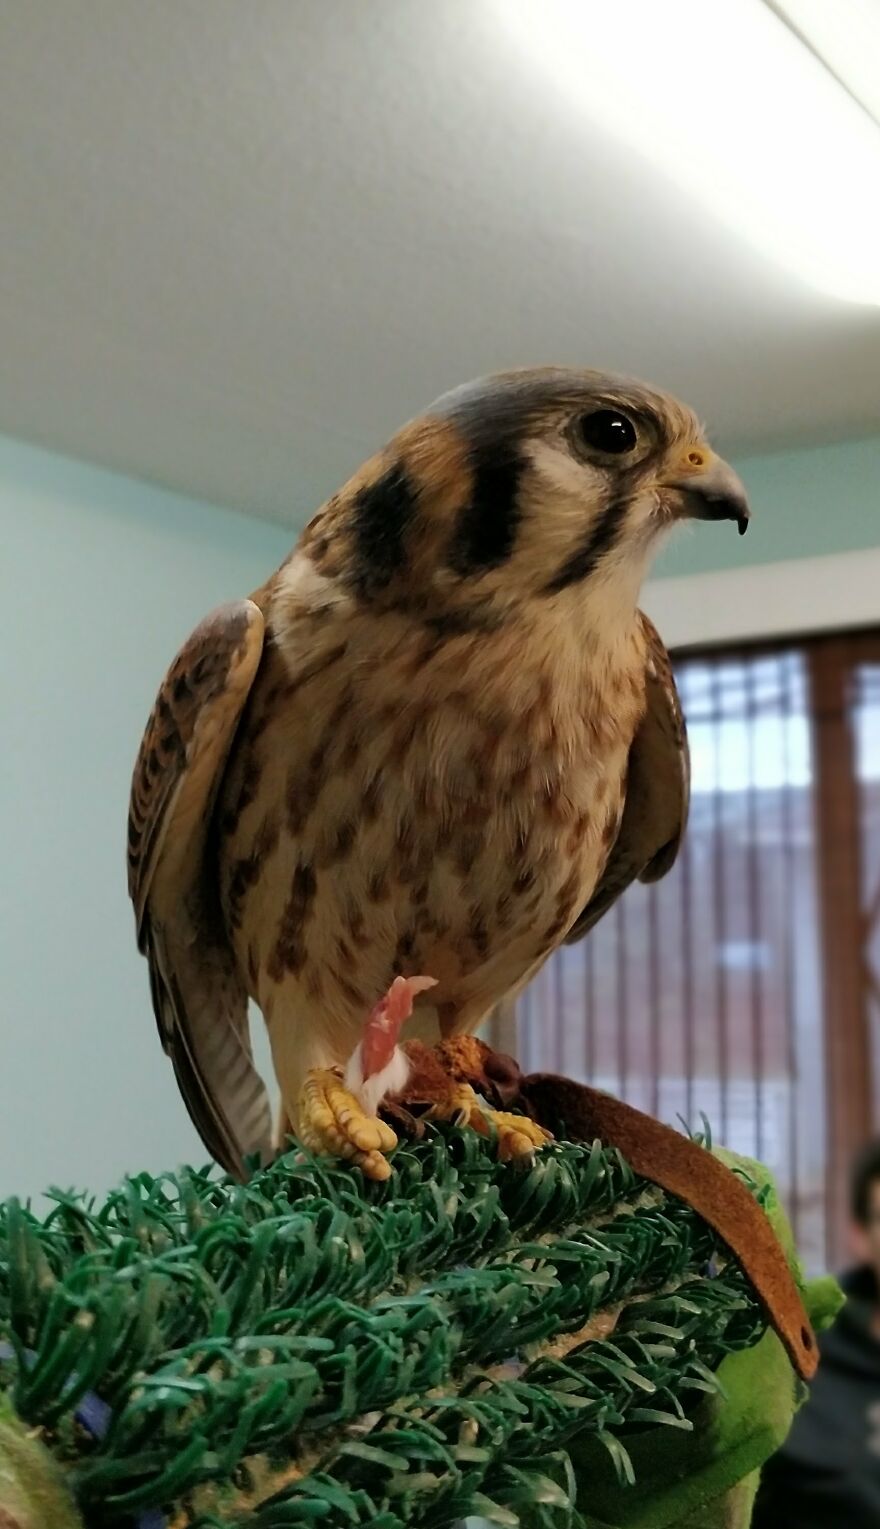 Got Up Close And Personal With A Resident Kestrel At A Birds-Of-Prey Rehab Centre I Volunteered At